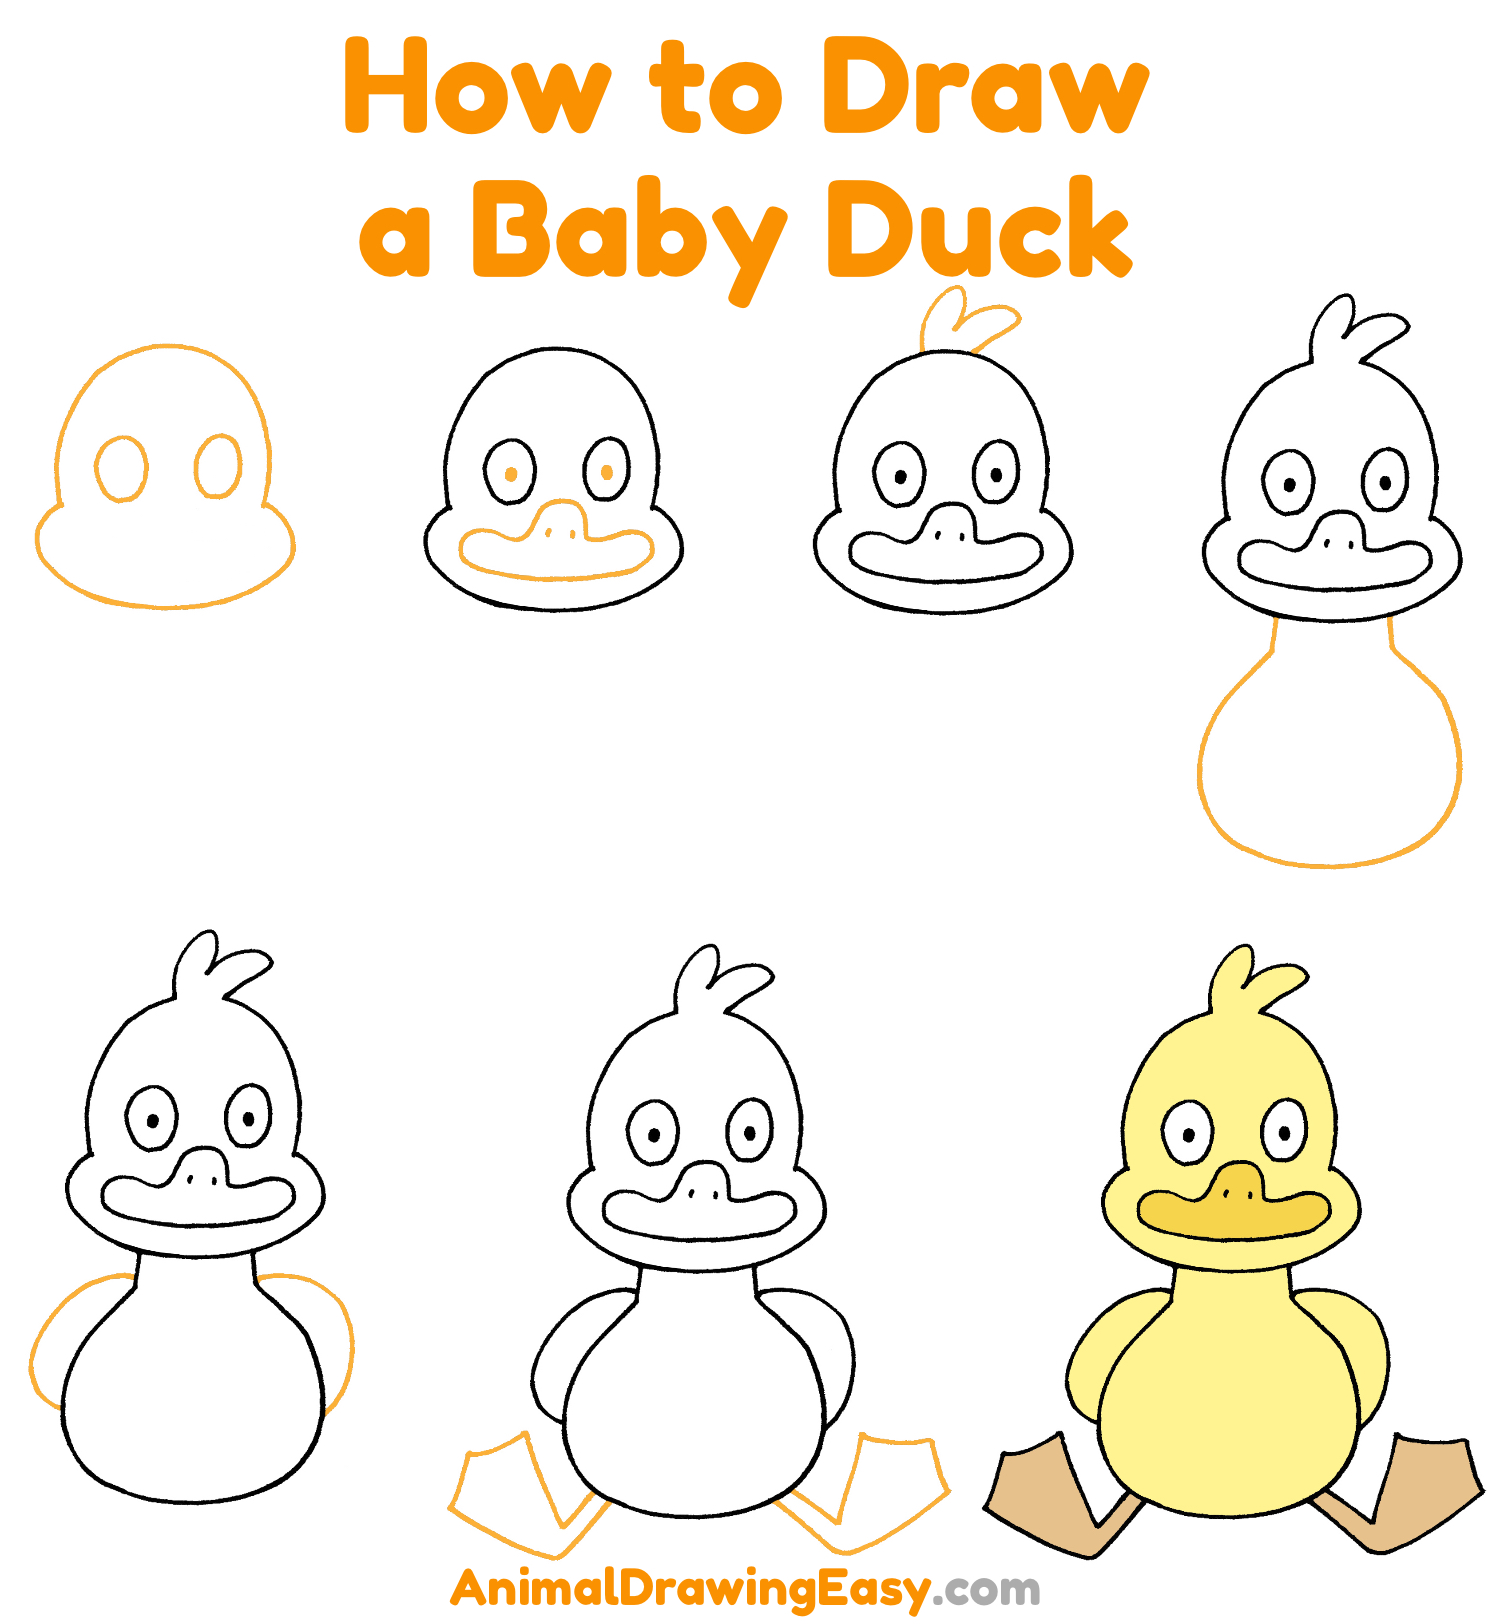 How to Draw a Baby Duck